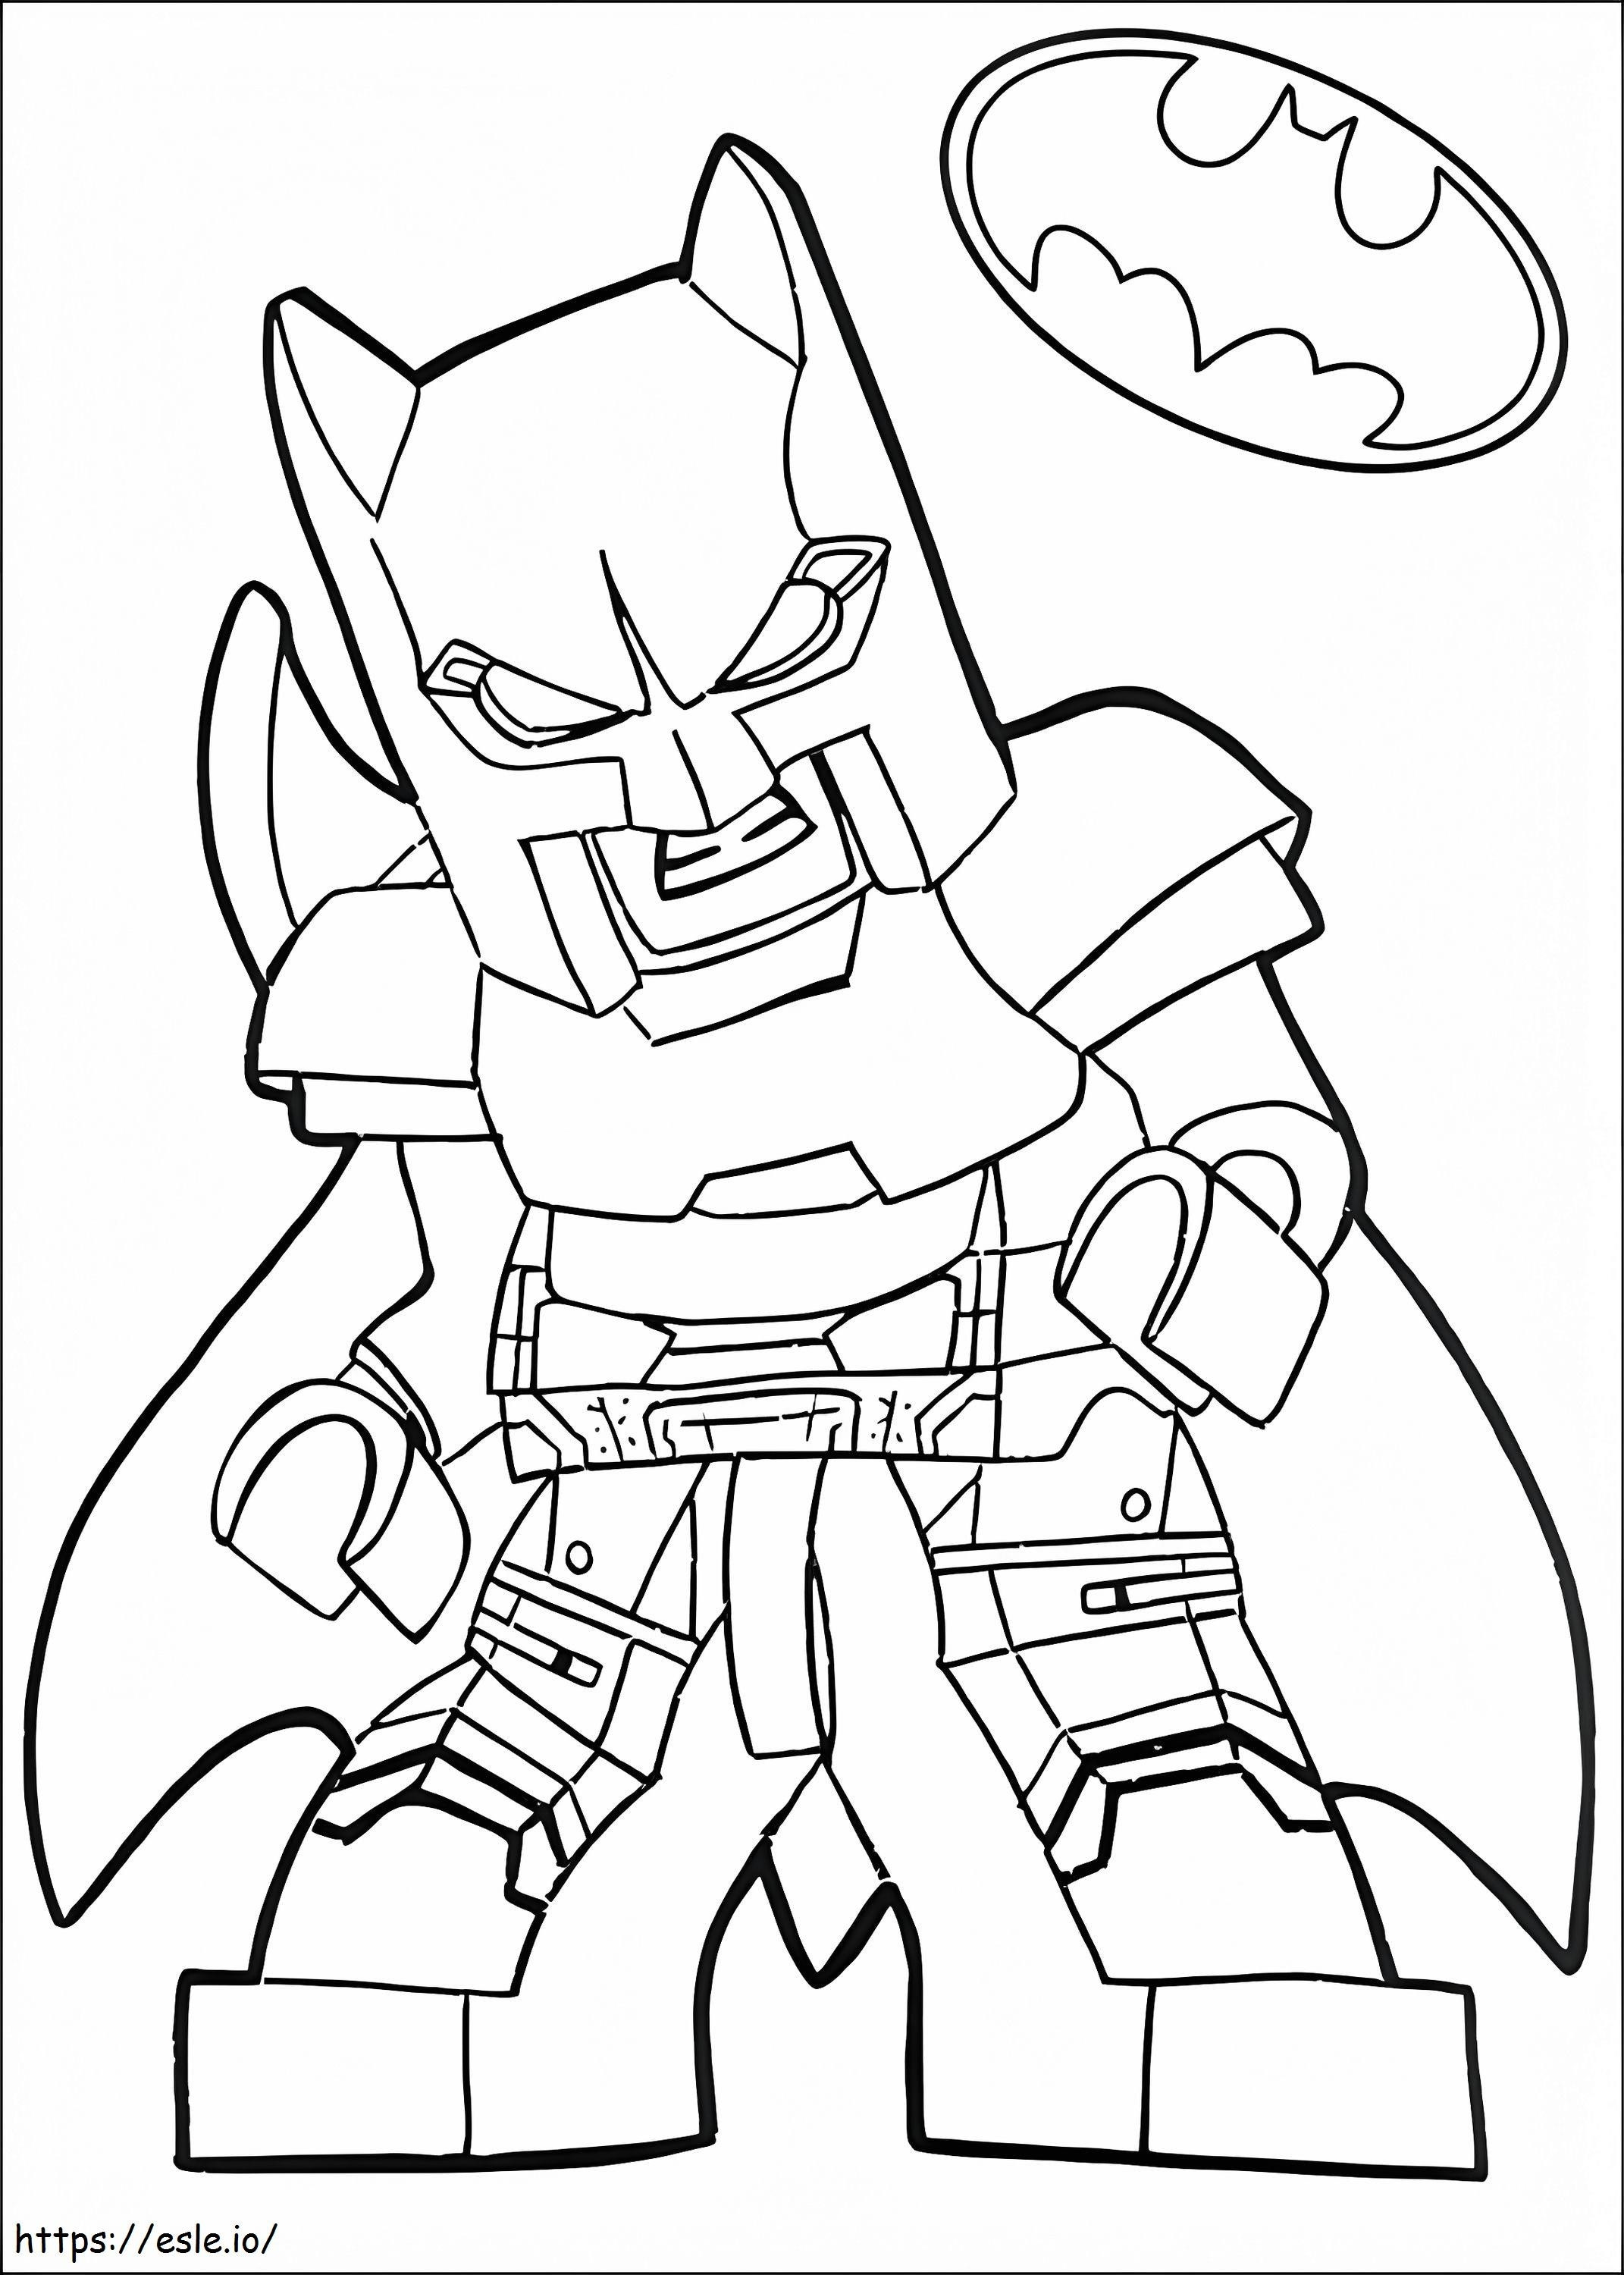 Angry Lego Batman coloring page